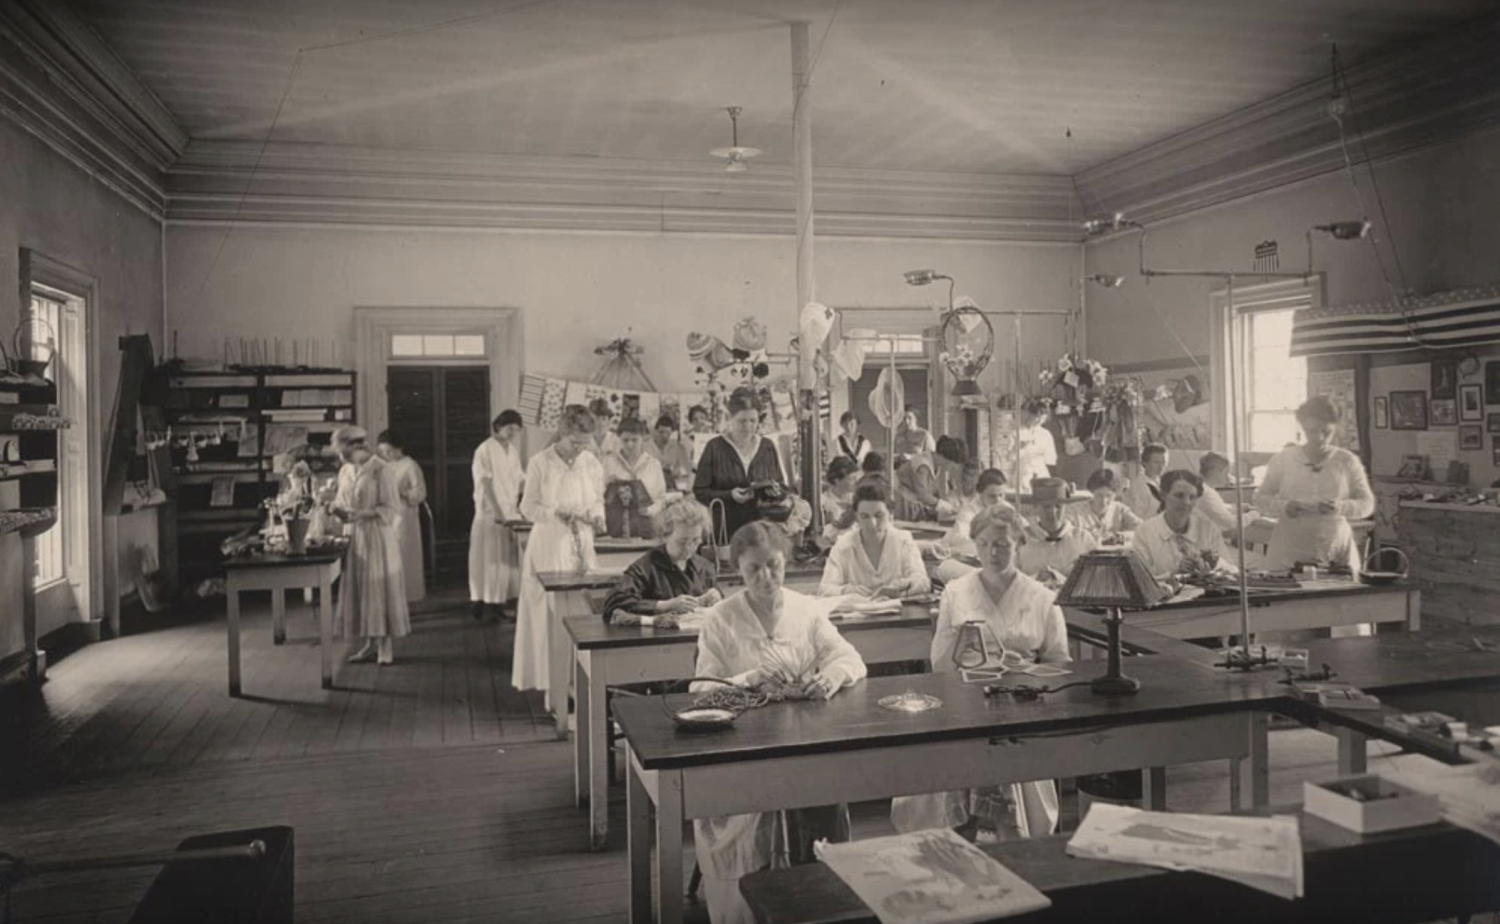 A Summer Session class in the early 1900s